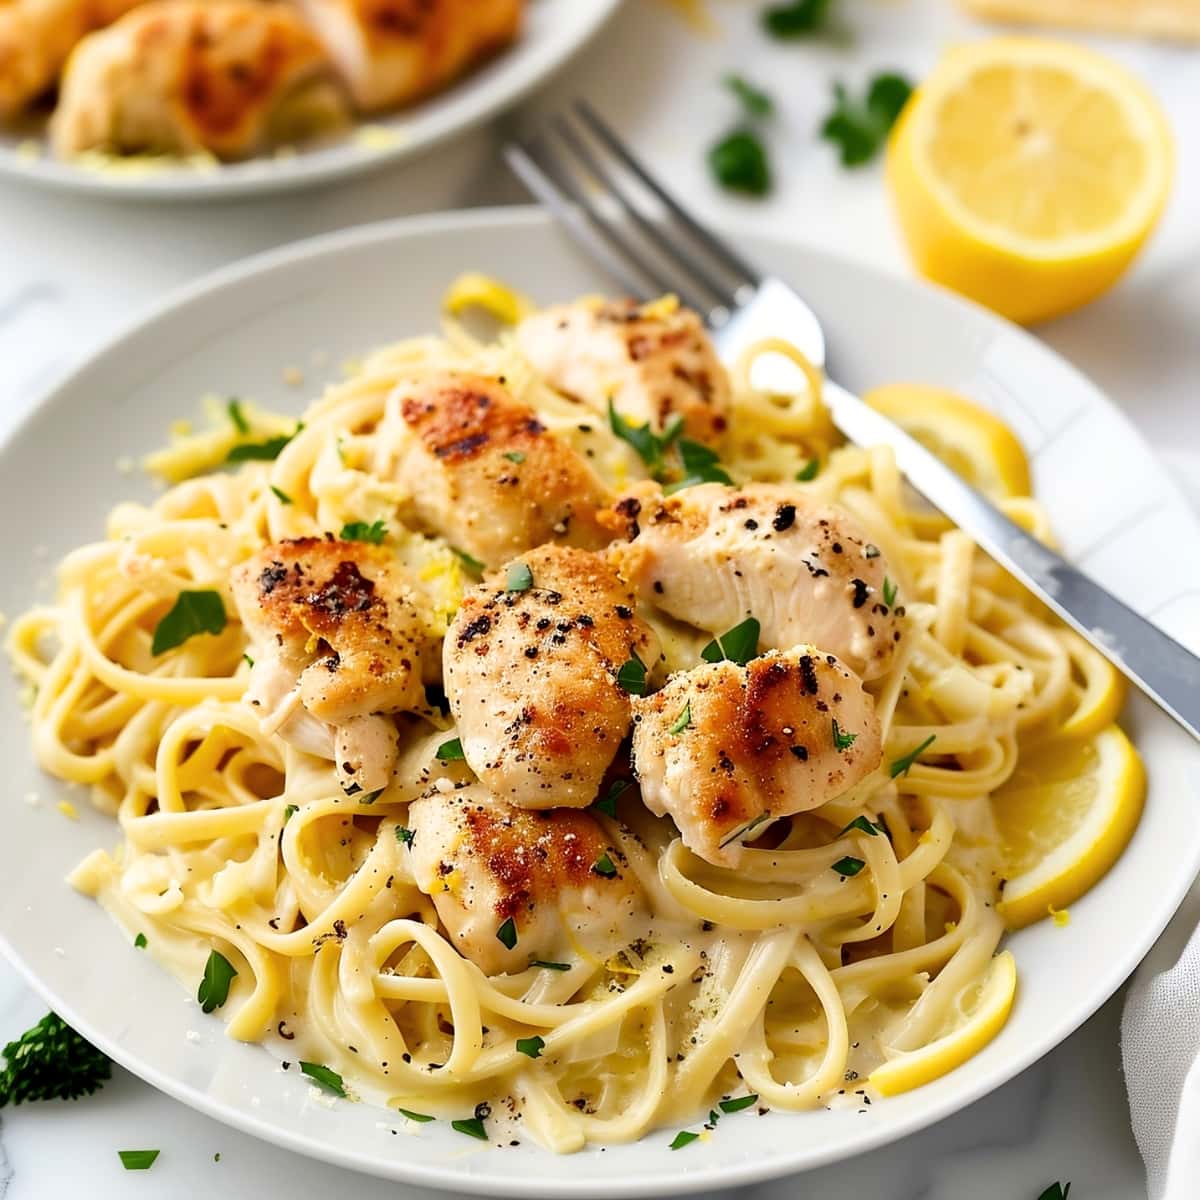 Creamy pasta with tender chunks of chicken and lemon